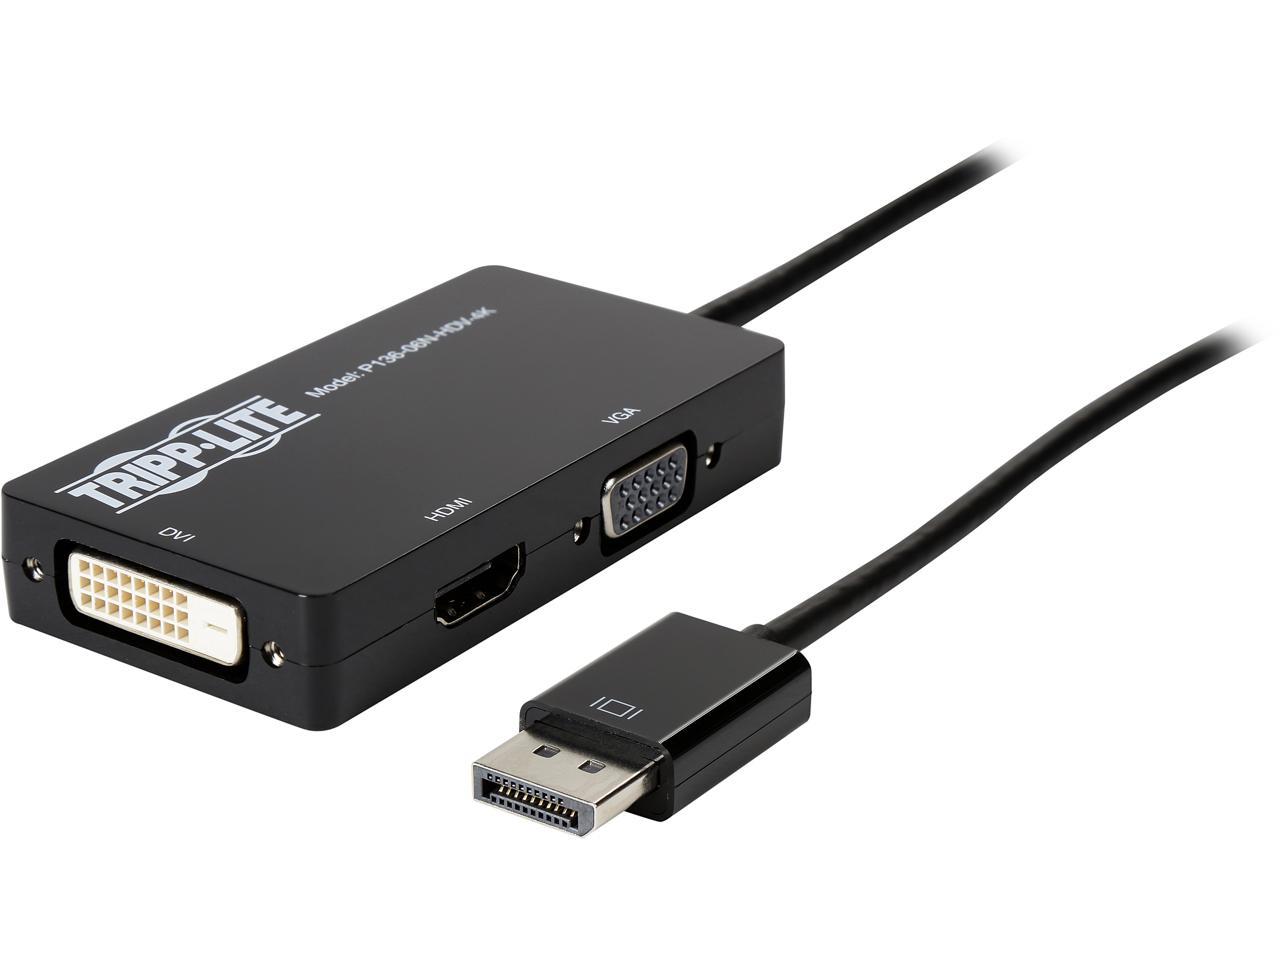 Tripp Lite DisplayPort to VGA/DVI/HDMI All-in-One Cable Adapter, Converter for DP 1.2, 4K x 2K HDMI (P136-06N-HDV-4K)